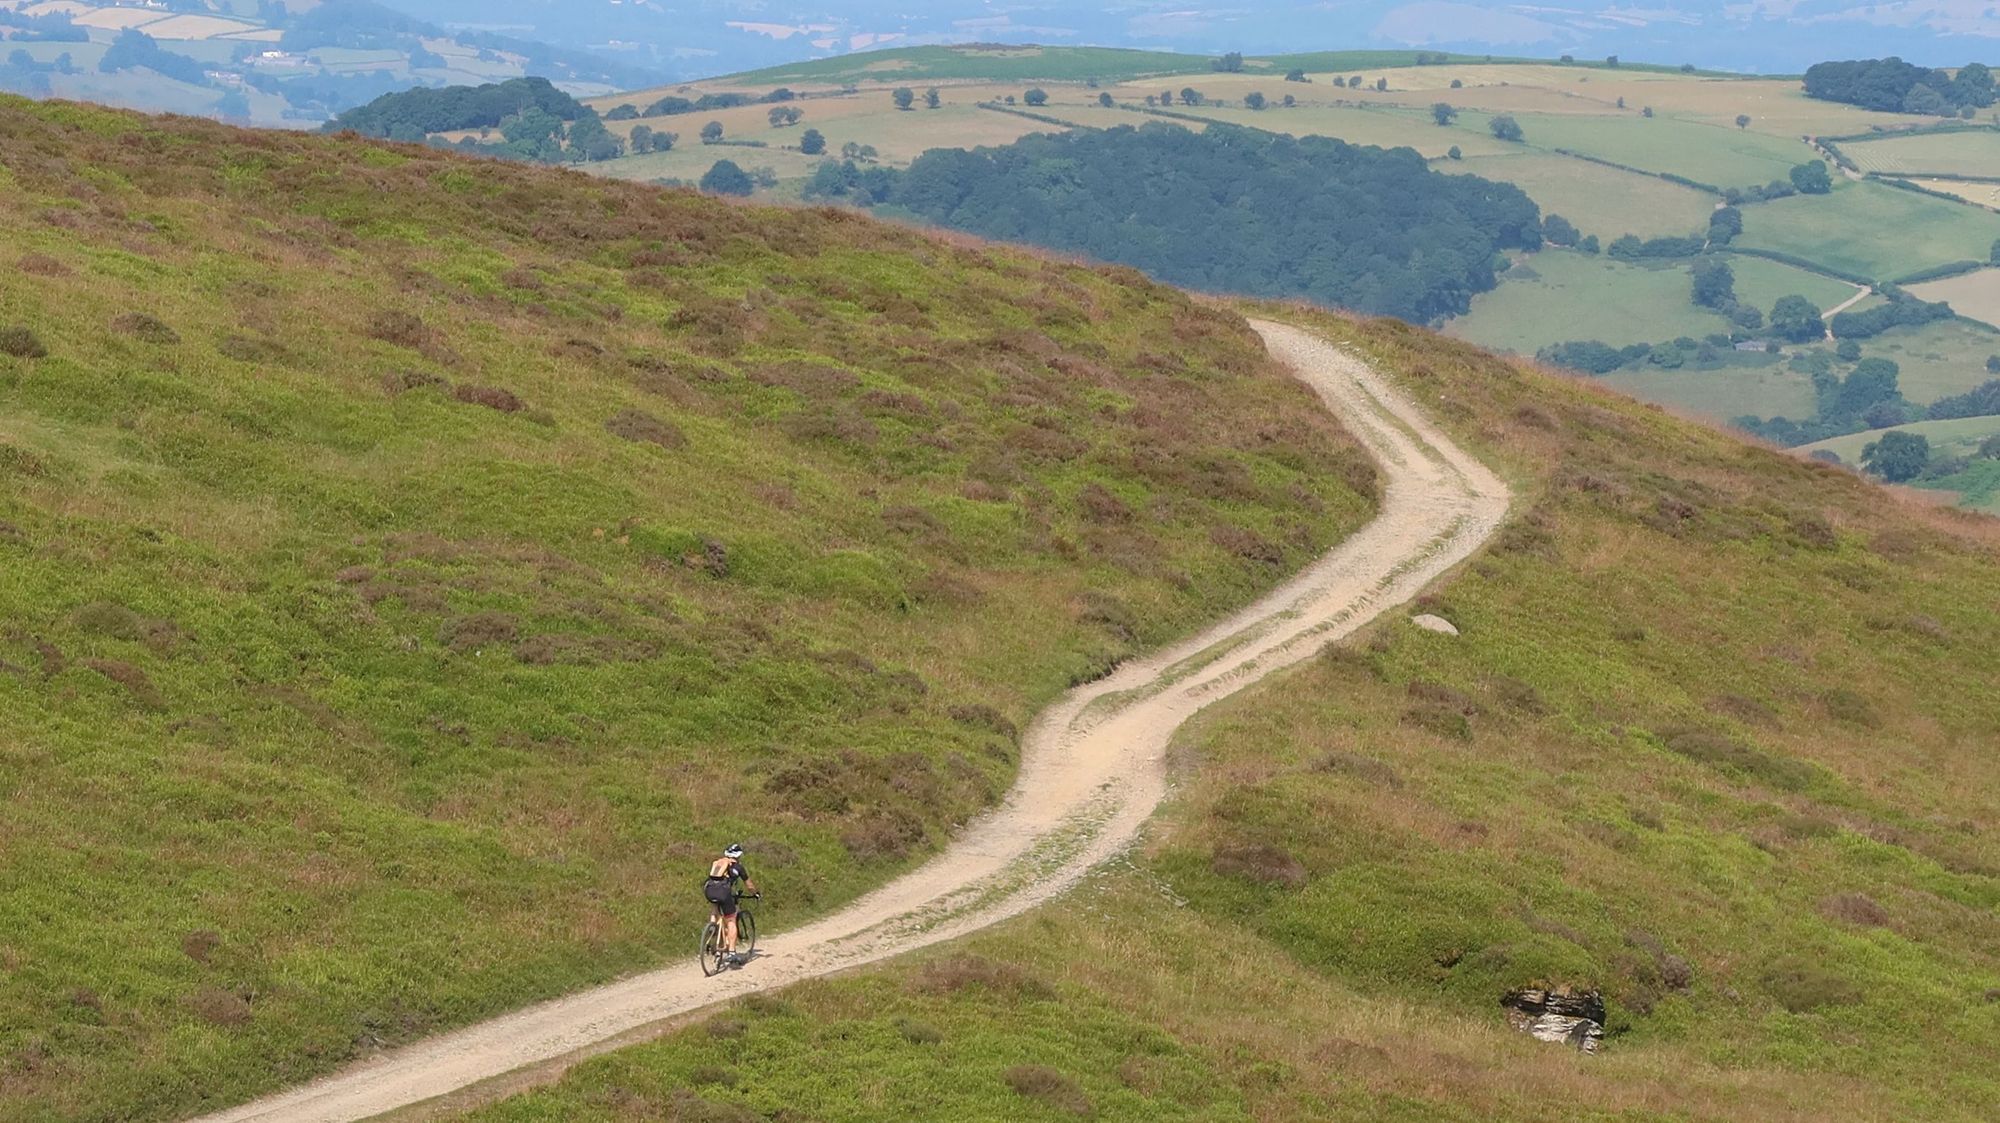 A gravel cyclist climbs up the mountain Twmpa, near the town of Hay-on-Wye in Wales.